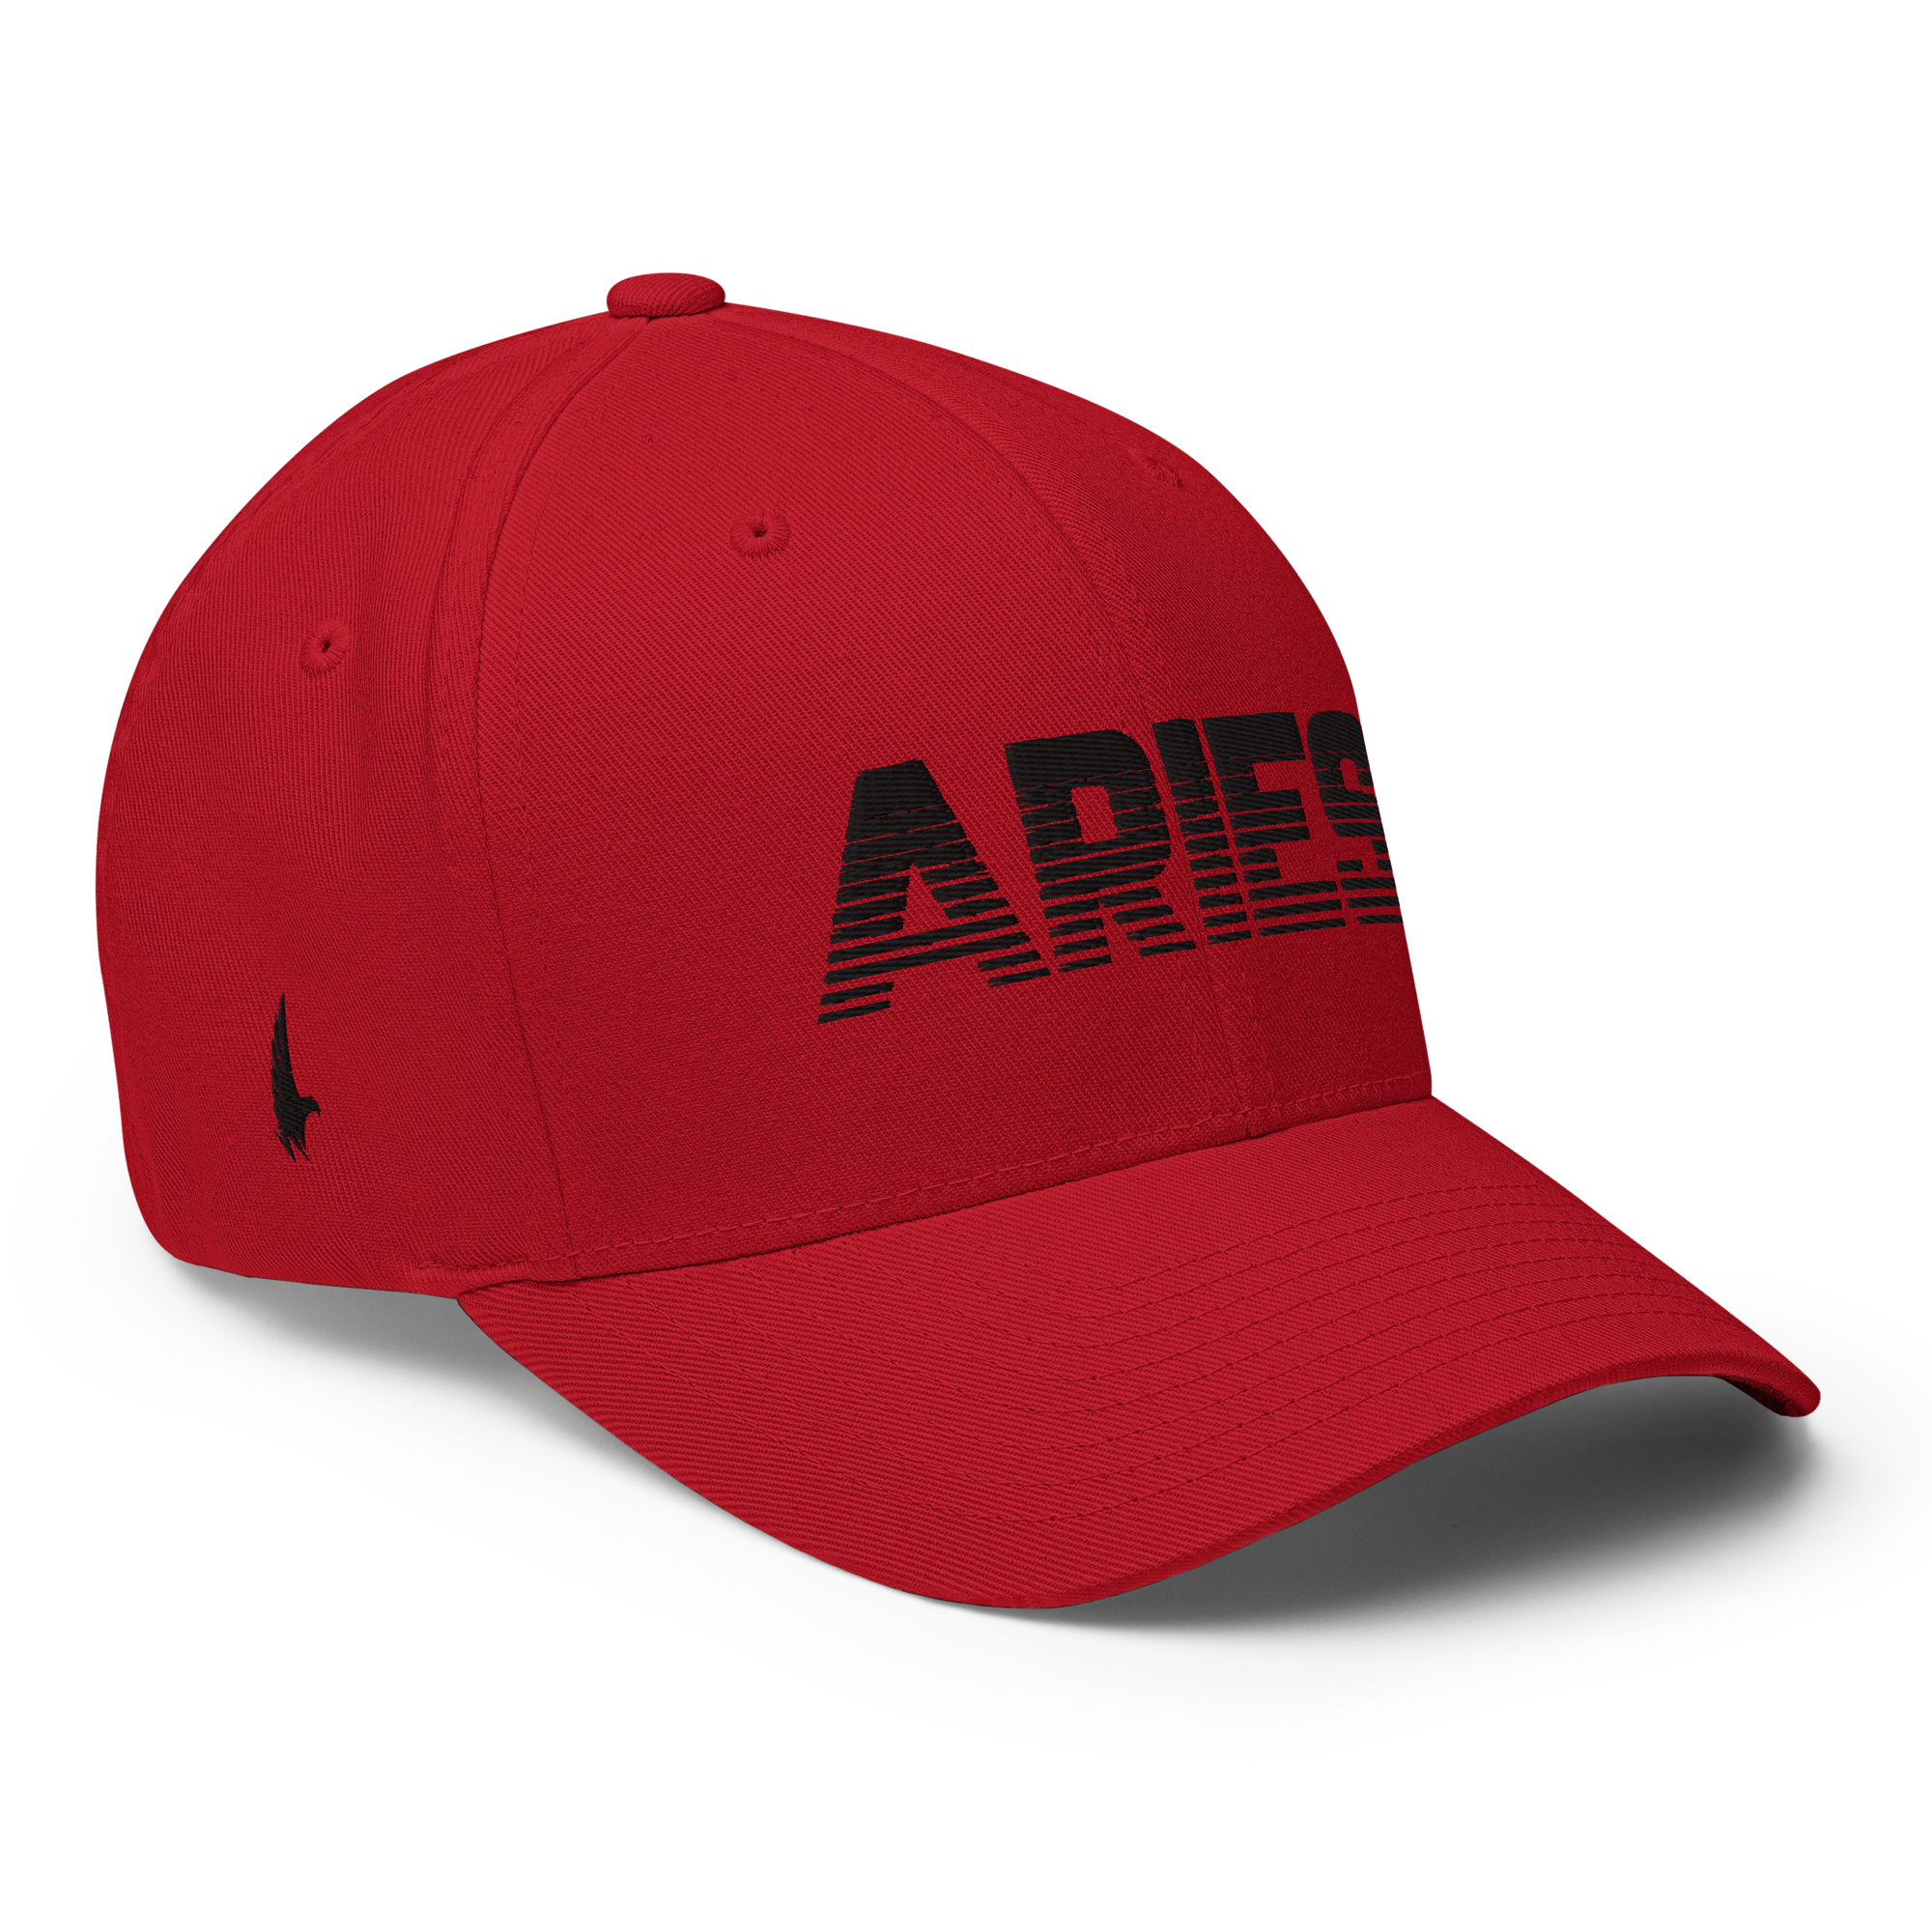 Aries Fitted Hat - Red/Black Fitted - Loyalty Vibes